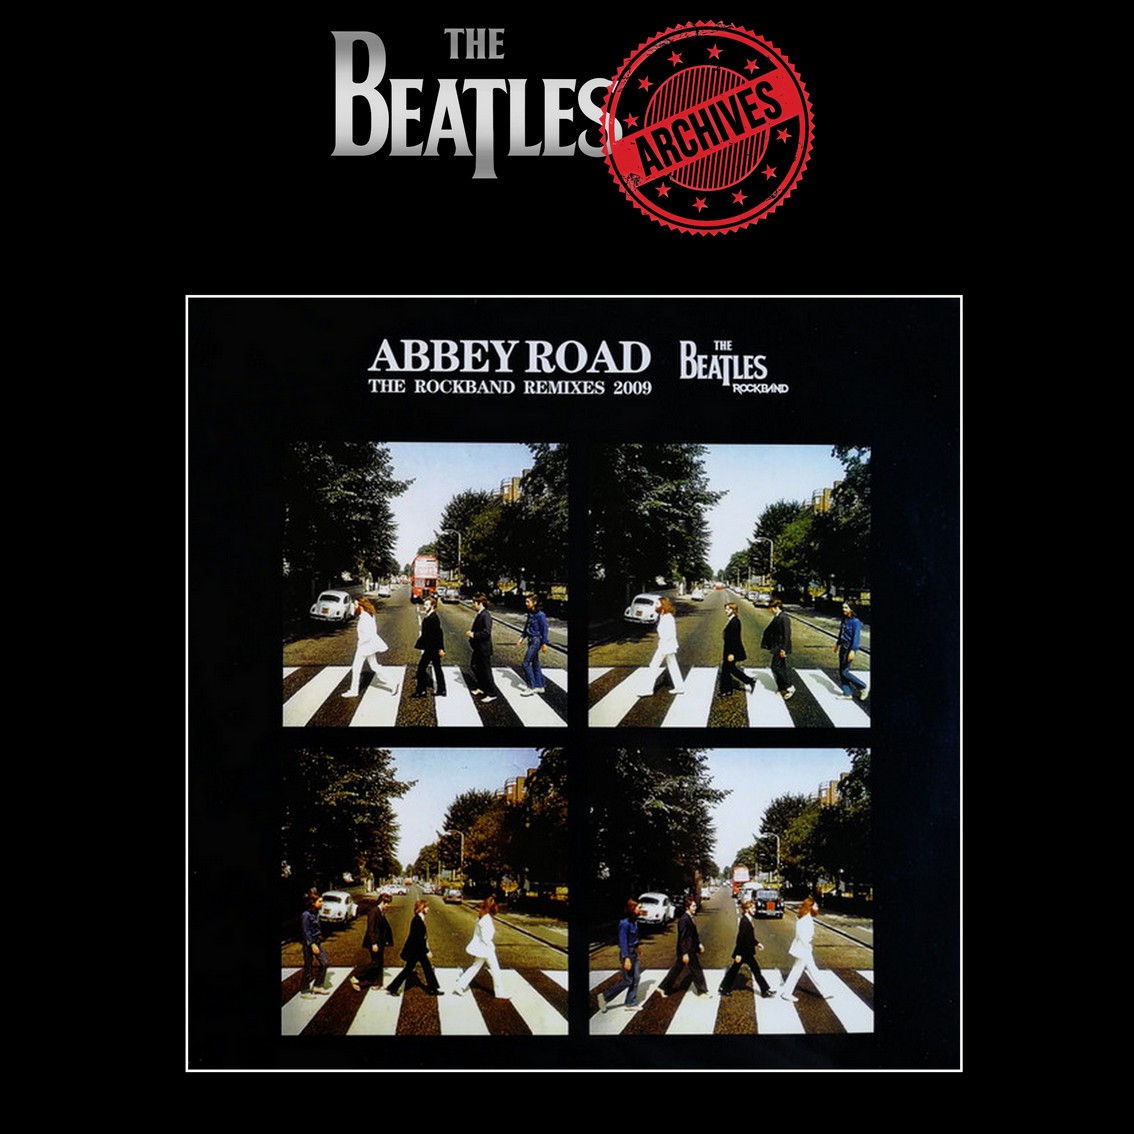 The Beatles Archives - Abbey Road, The RockBand Remixes, 2009